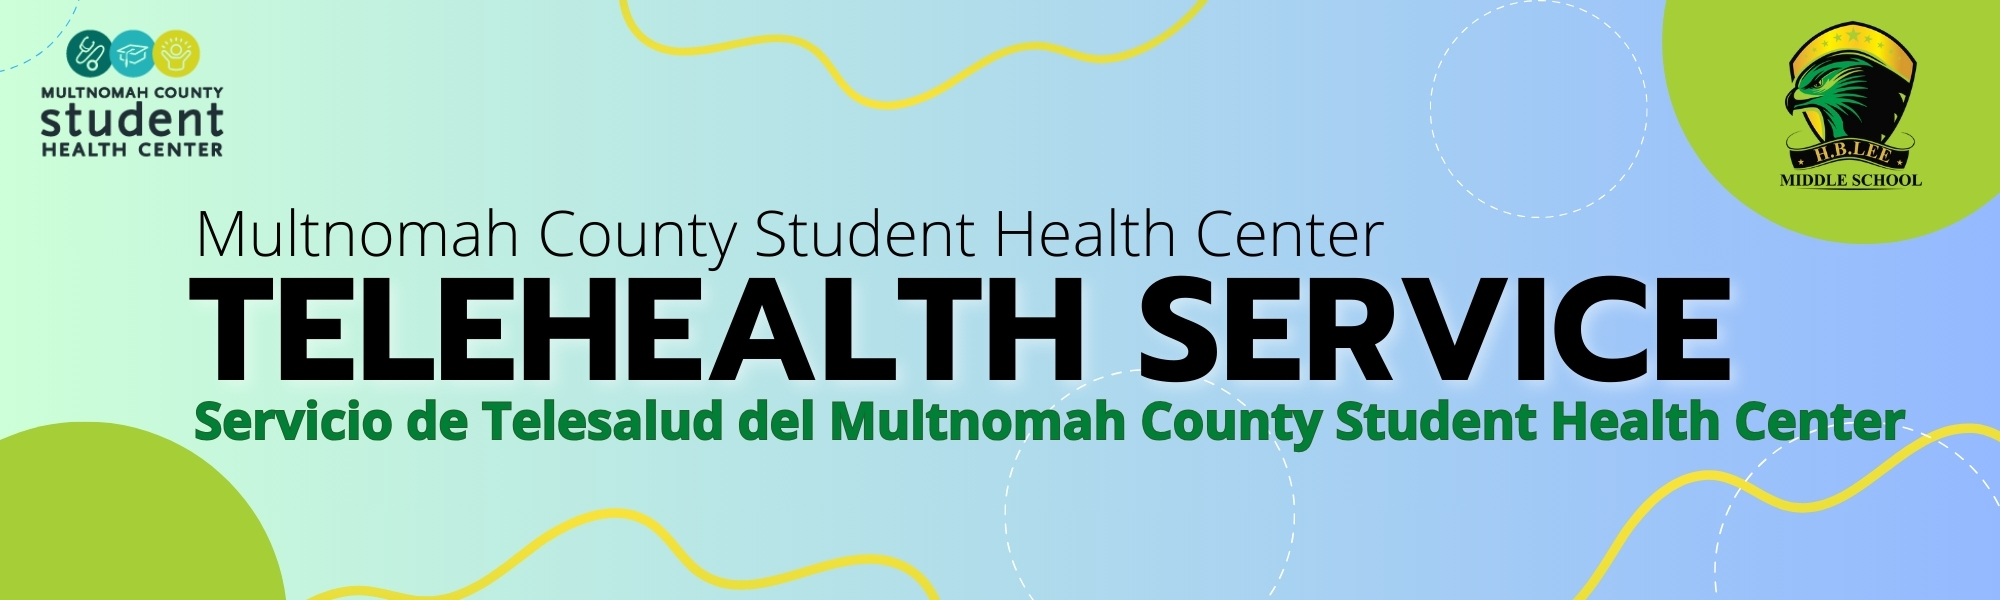 Multnomah County Student Health Center Telehealth Service at H.B. Lee Middle School